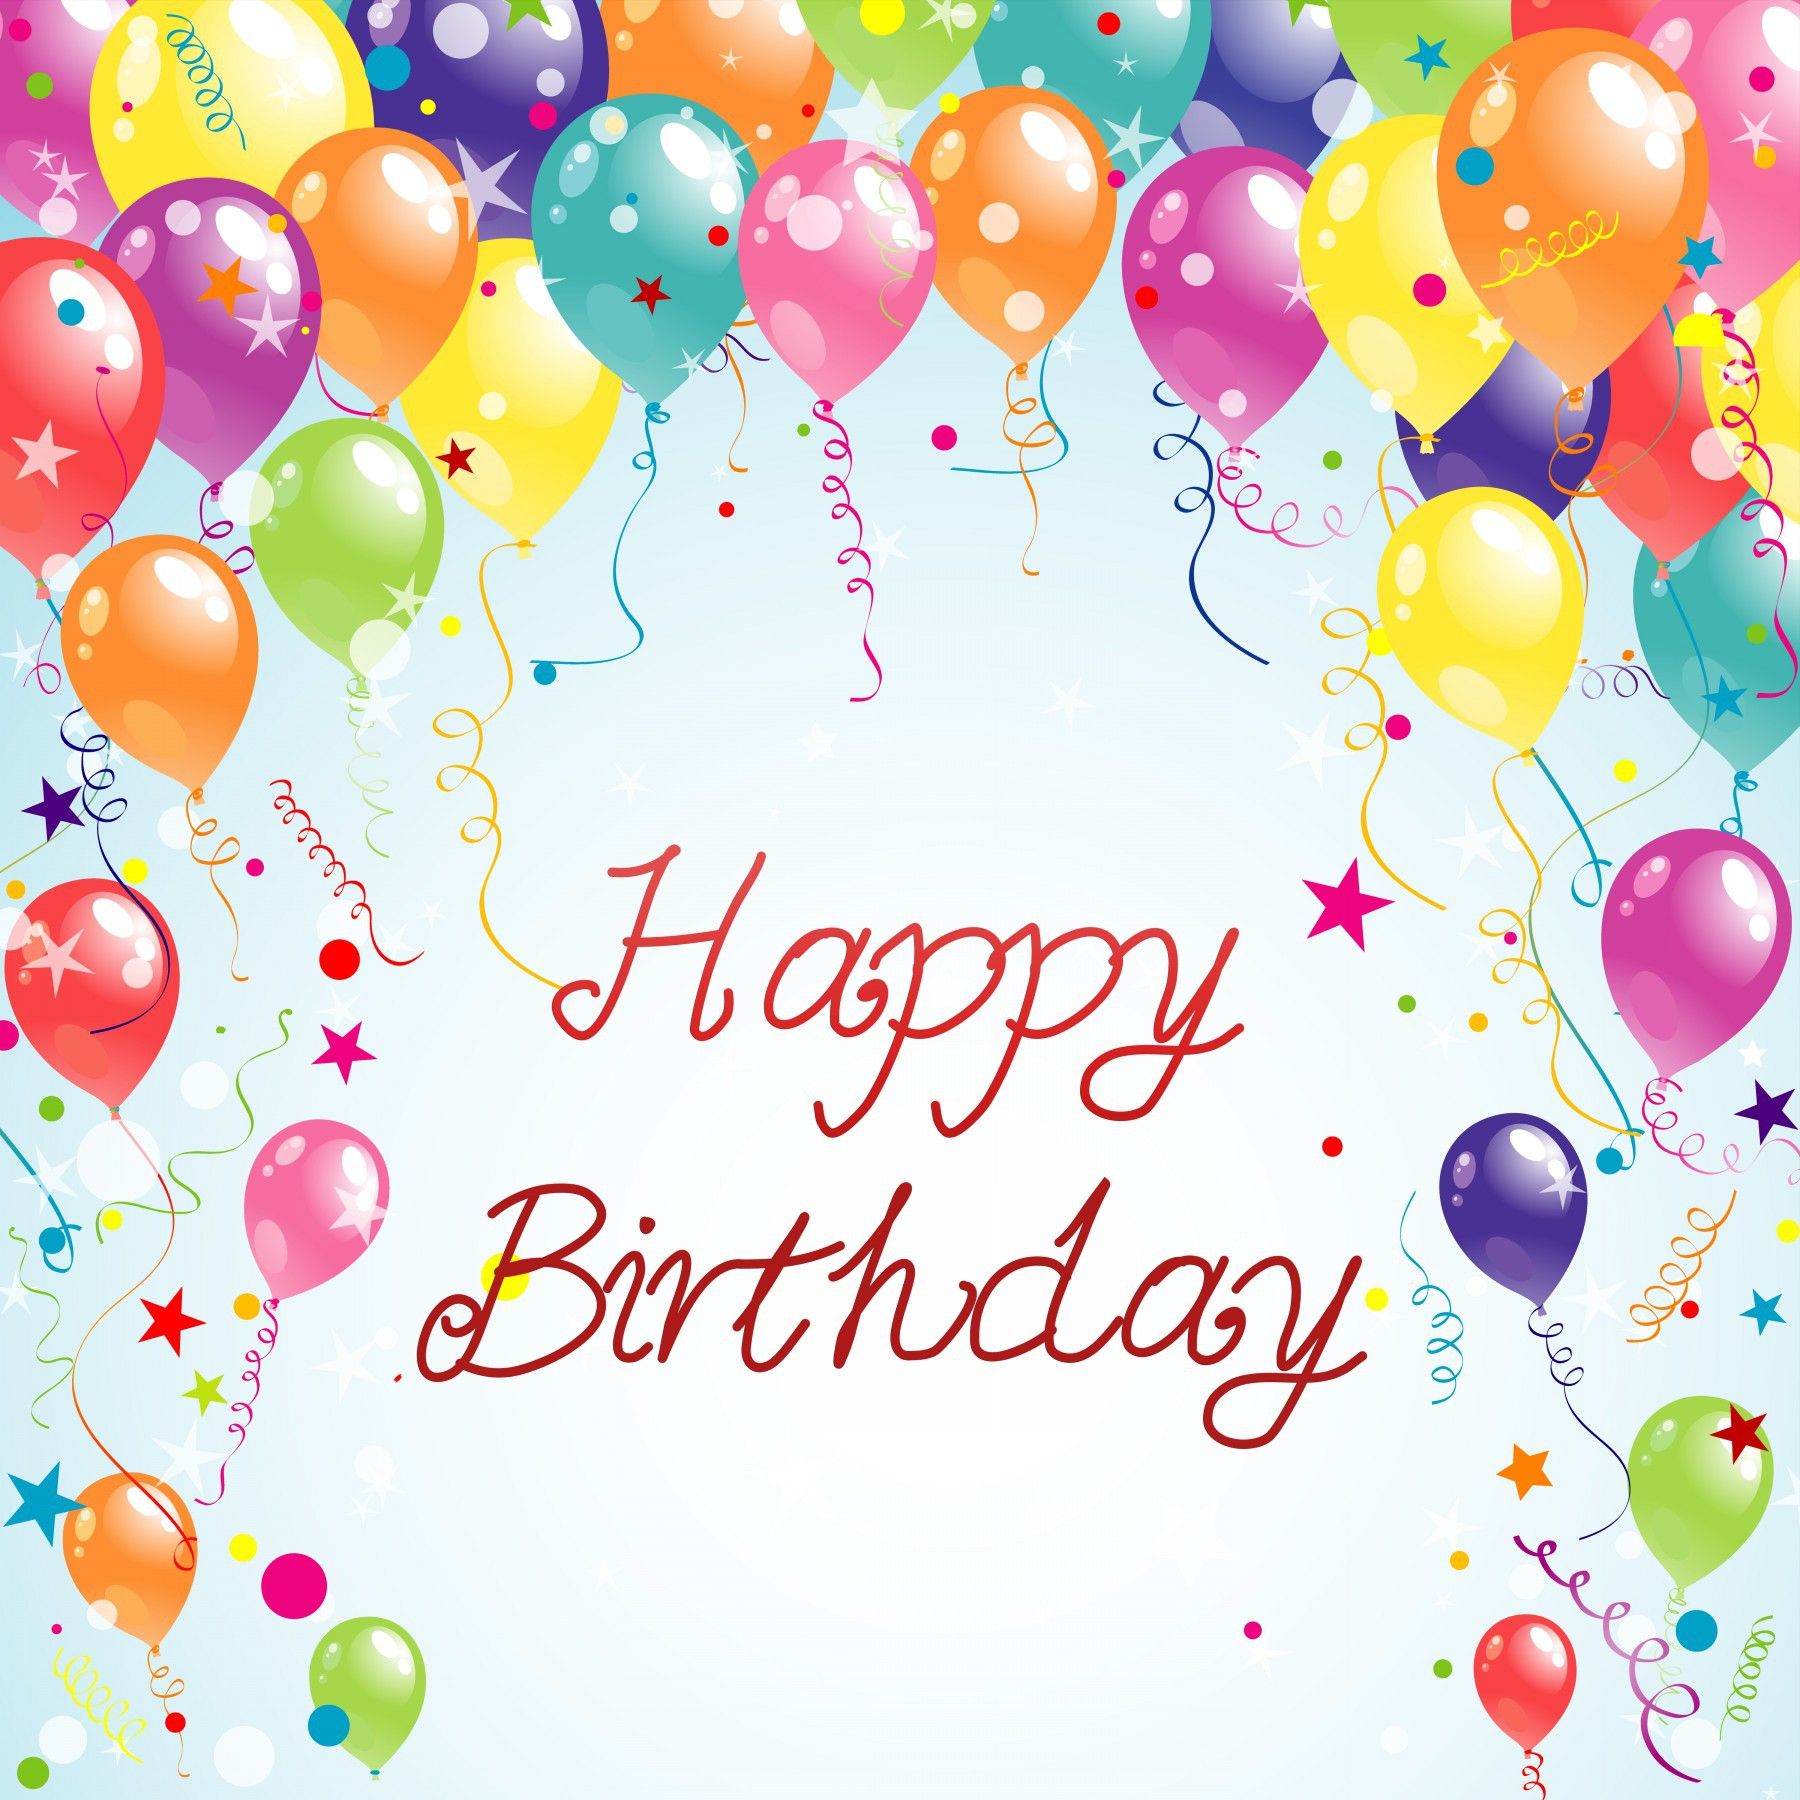 Happy birthday greeting card images hd